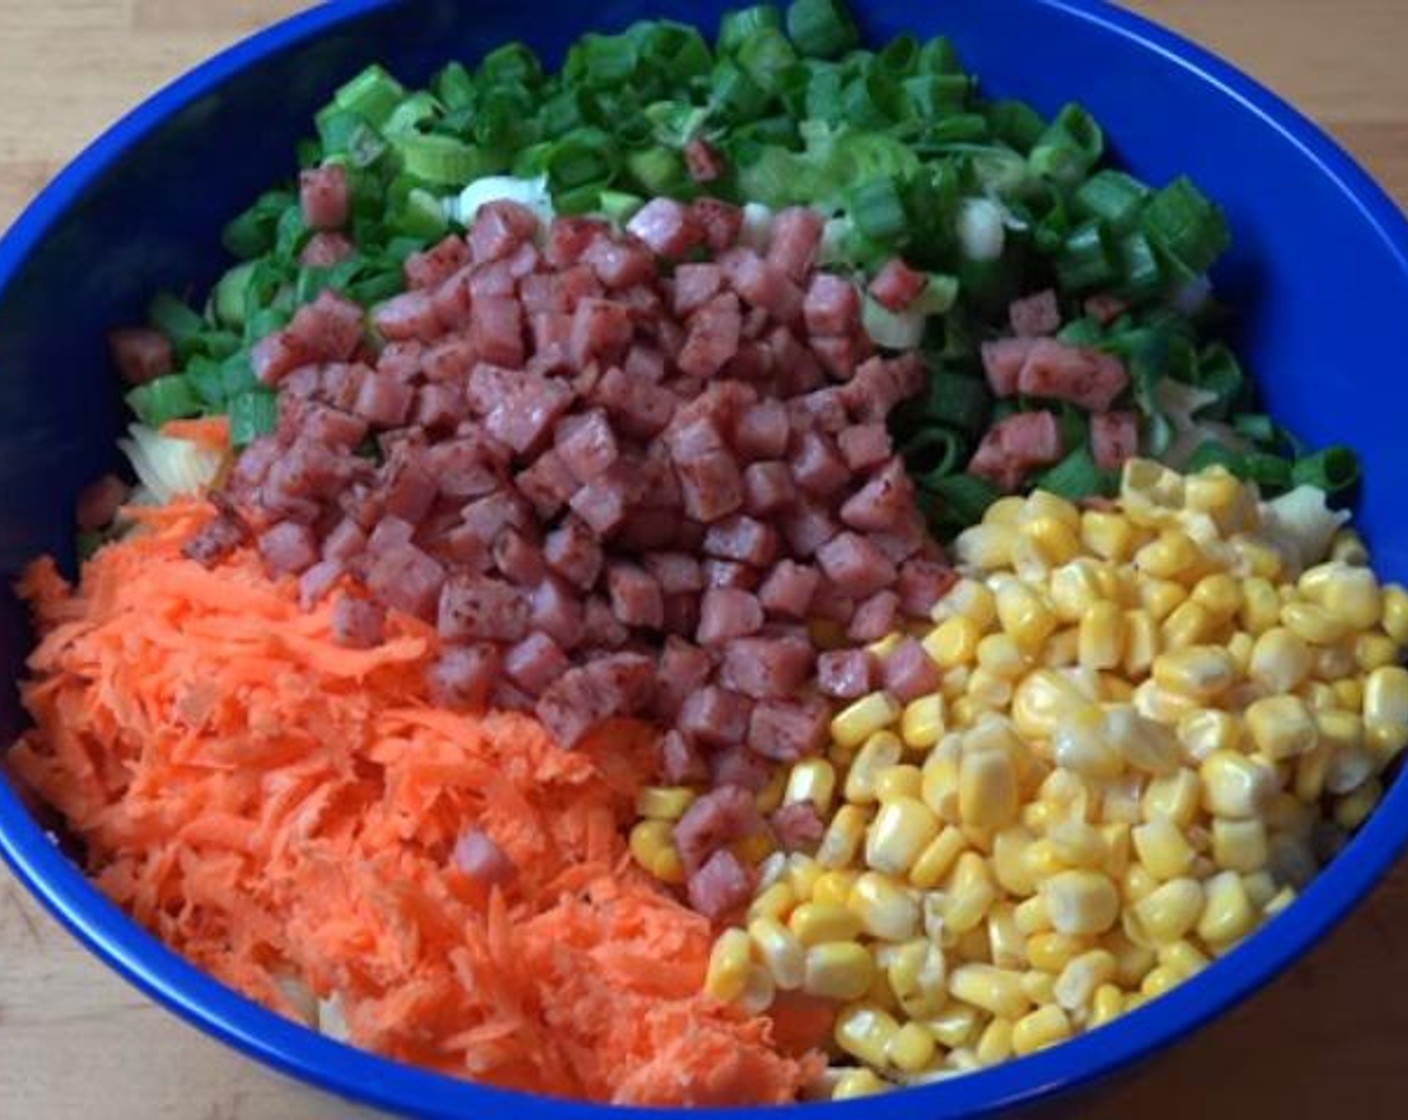 step 3 In a large mixing bowl, toss together the Pasta (14 oz), Carrots (2), Sweet Corn (2 cans), Scallion (1 bunch) and the fried bacon.